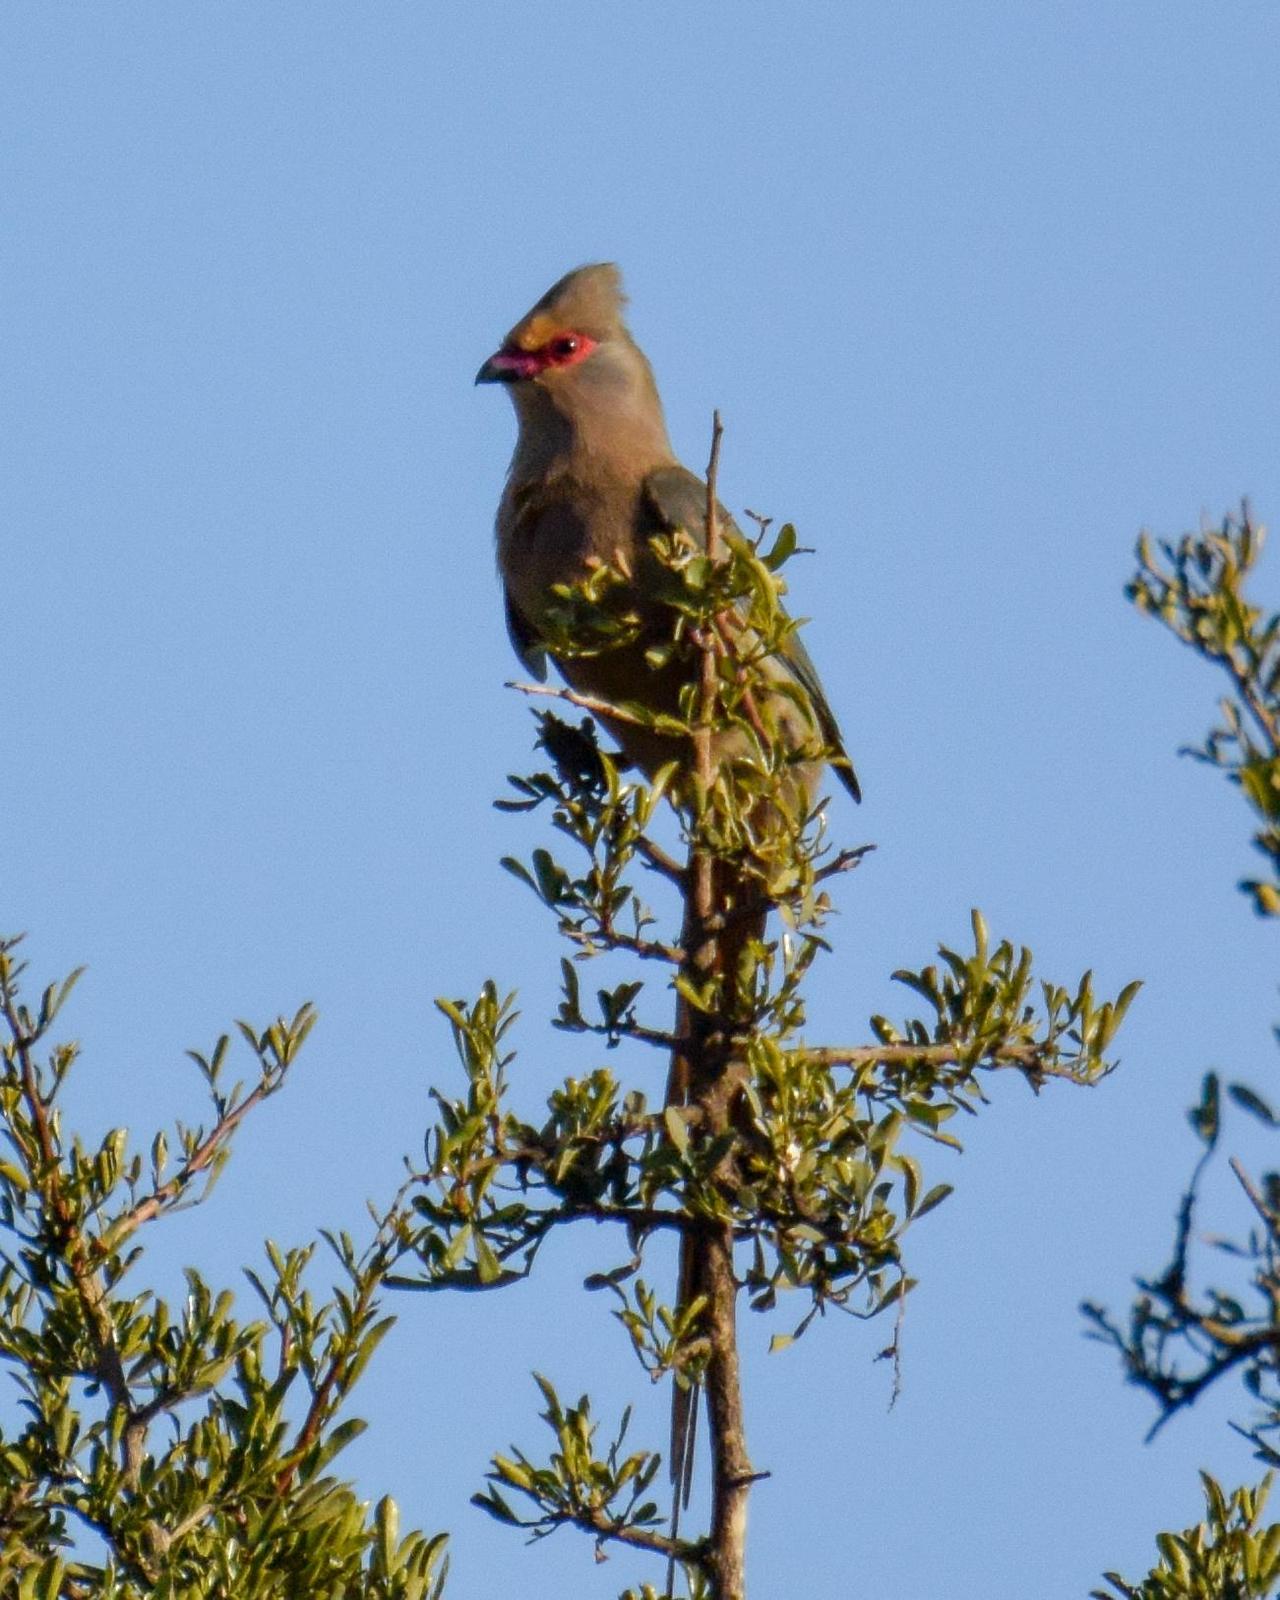 Red-faced Mousebird Photo by Steve Percival